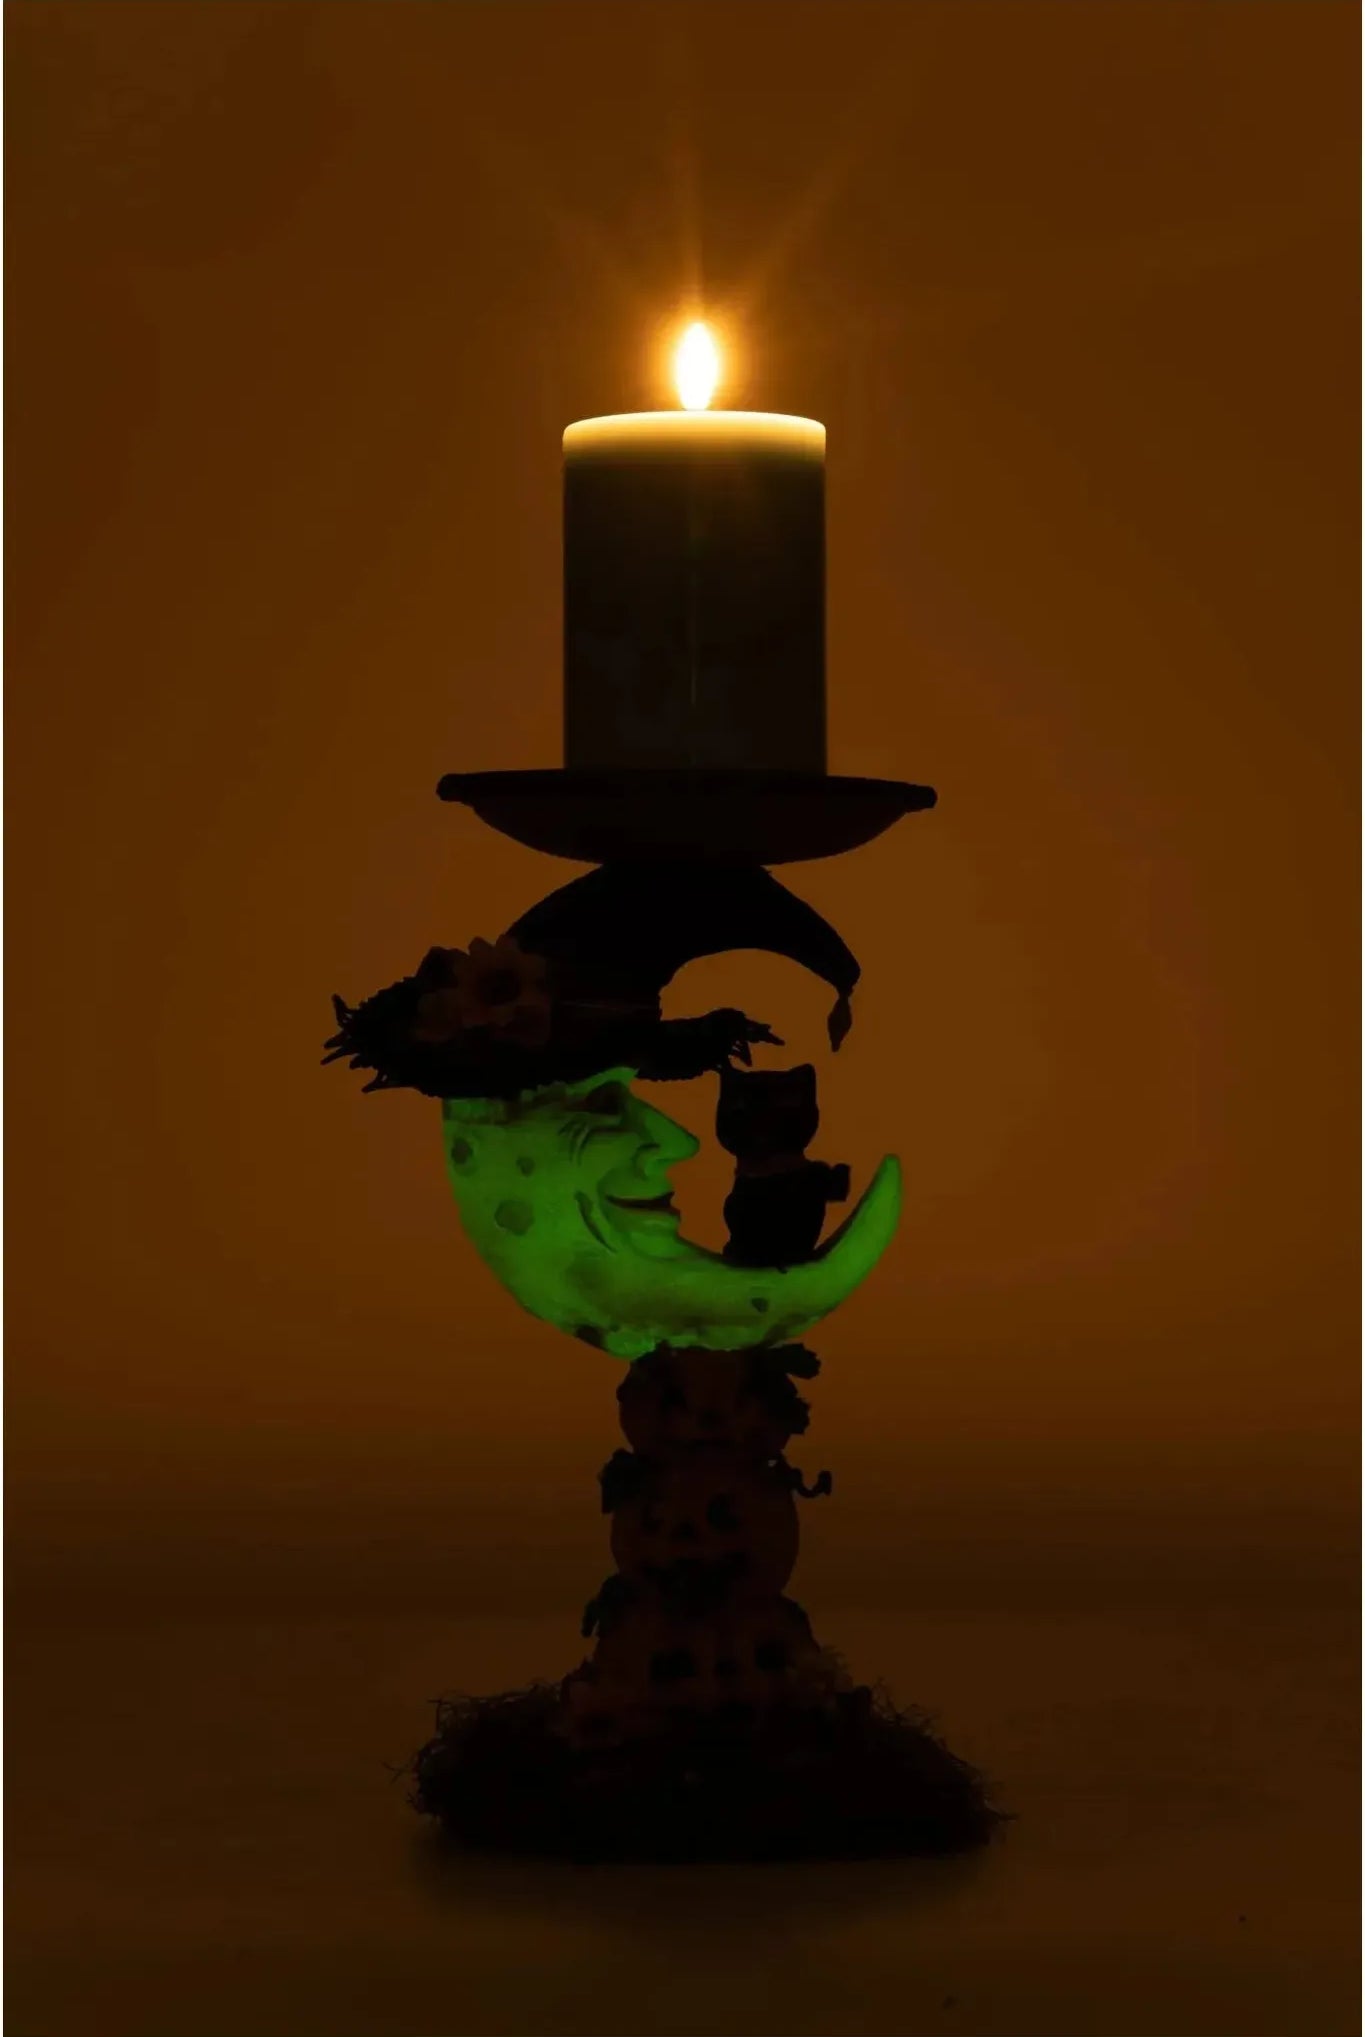 Jacks and Cats Moon Pillar Candle Holder - Michelle's aDOORable Creations - Halloween Decor